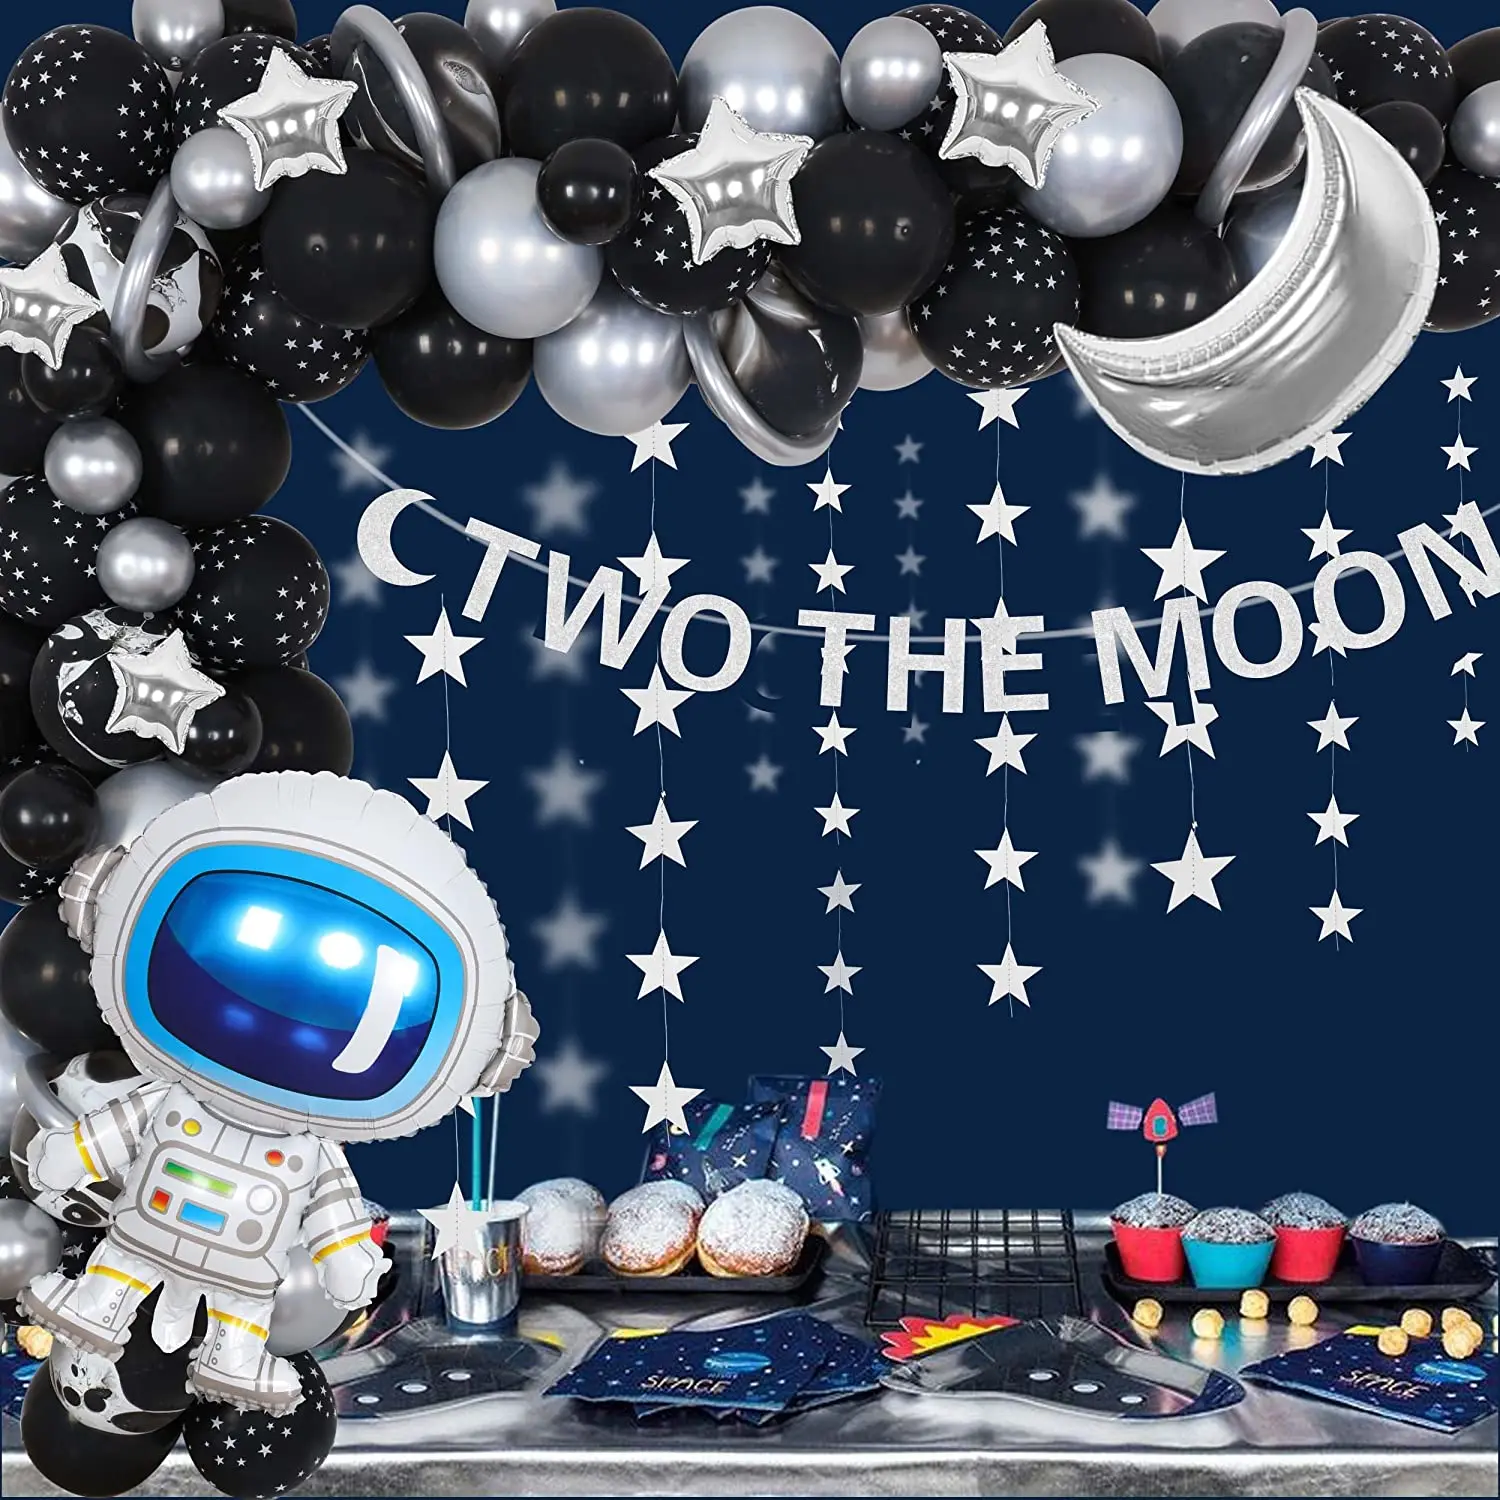 

Funmemoir Two The Moon 2nd Birthday Party Decorations for Boy Space Theme Party Supplies Astronaut Star Moon Balloon Garland Kit